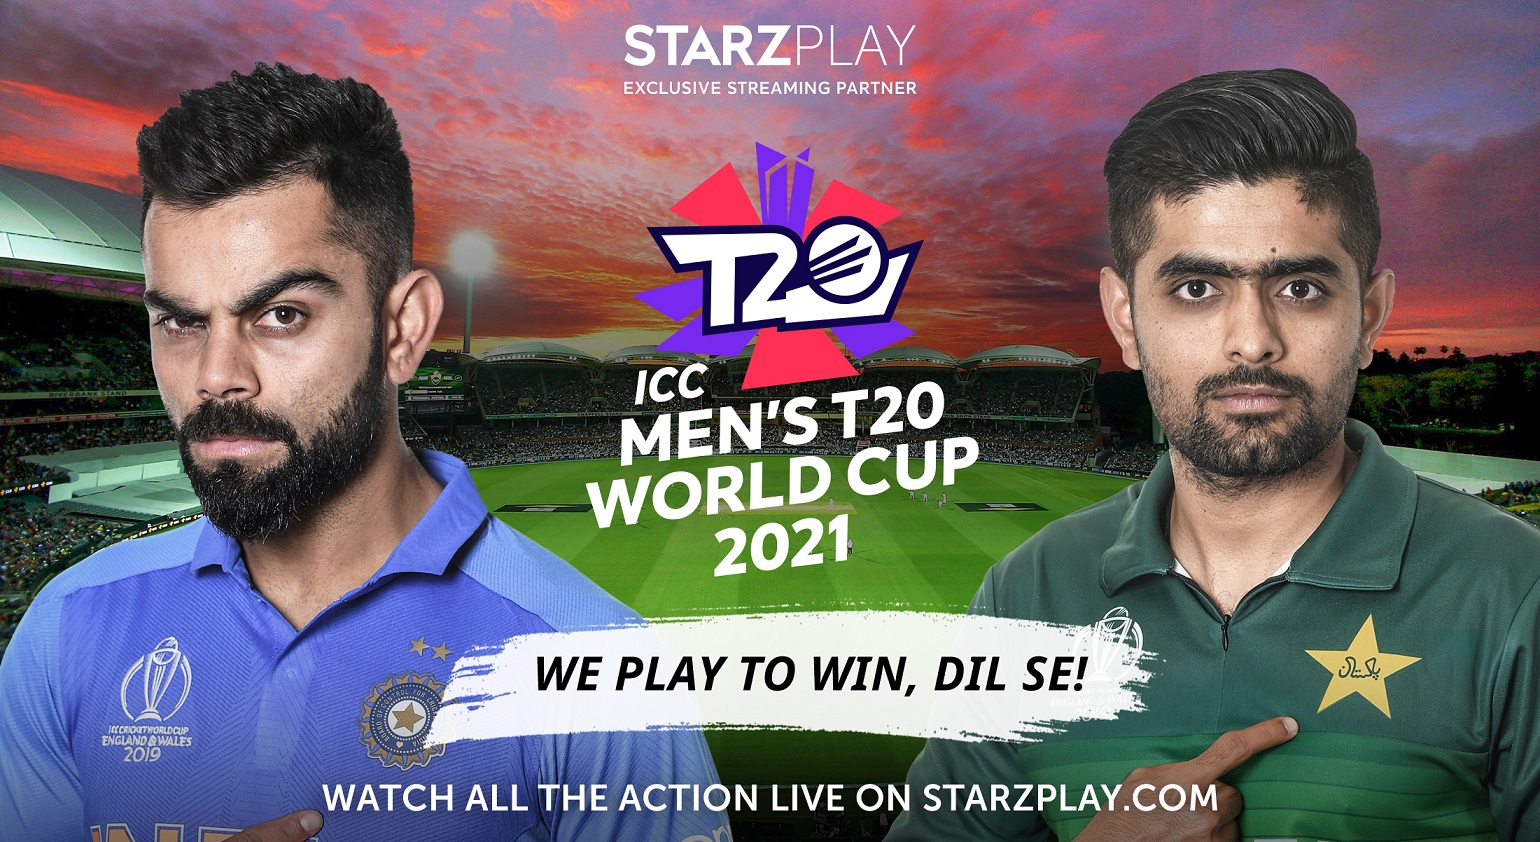 t20 world cup streaming rights